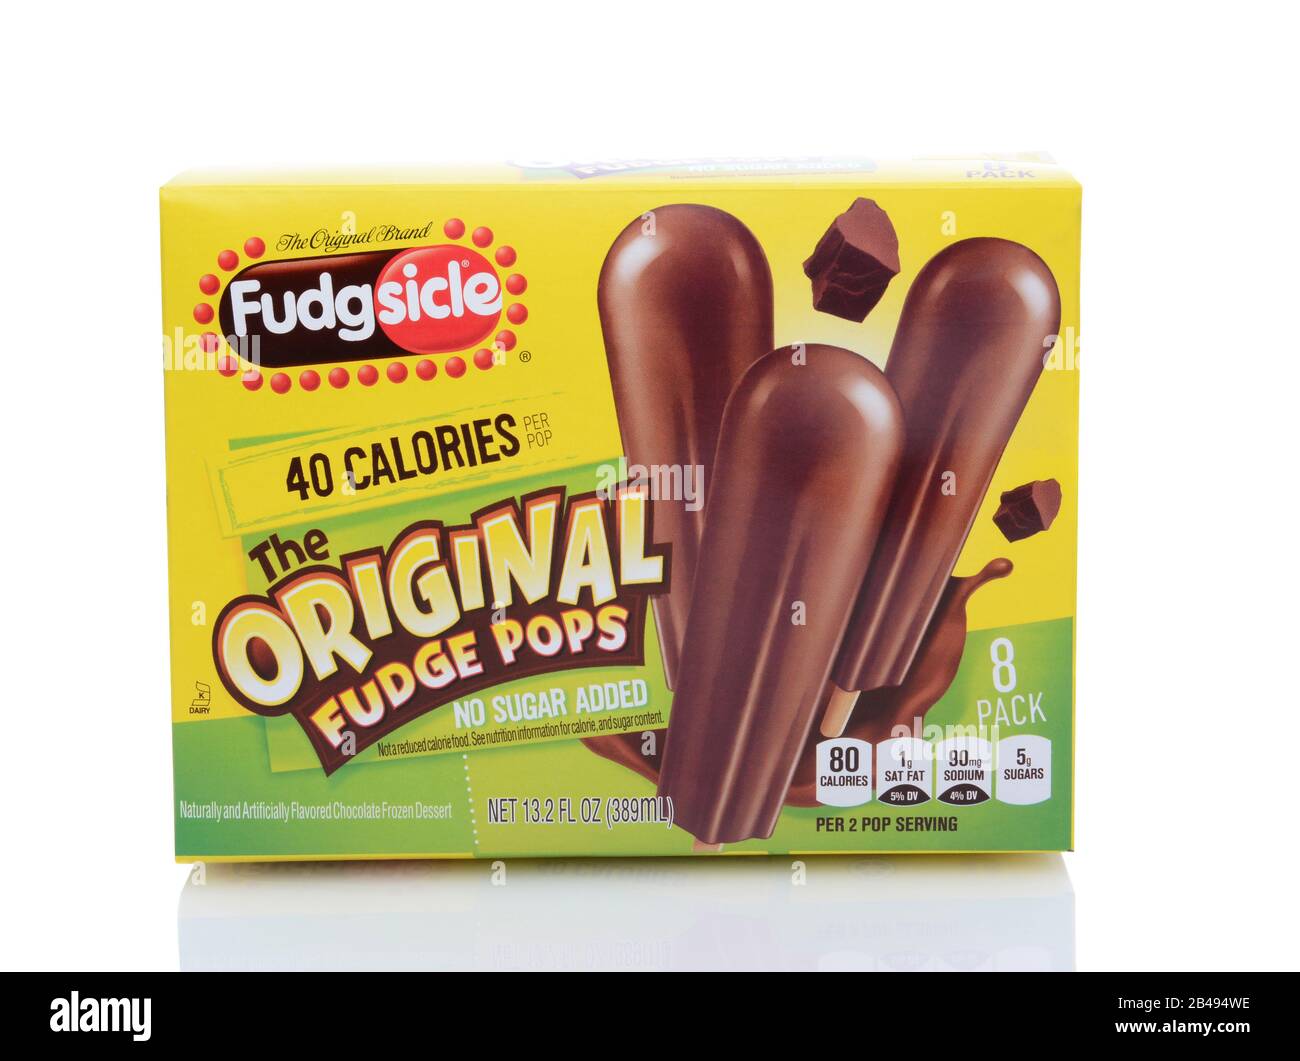 IRVINE, CA - May 14, 2014: An 8 pack of Fudgsicle Brand frozen dessert bars. Fudgsicle is a registered trademark of Unilever. Stock Photo